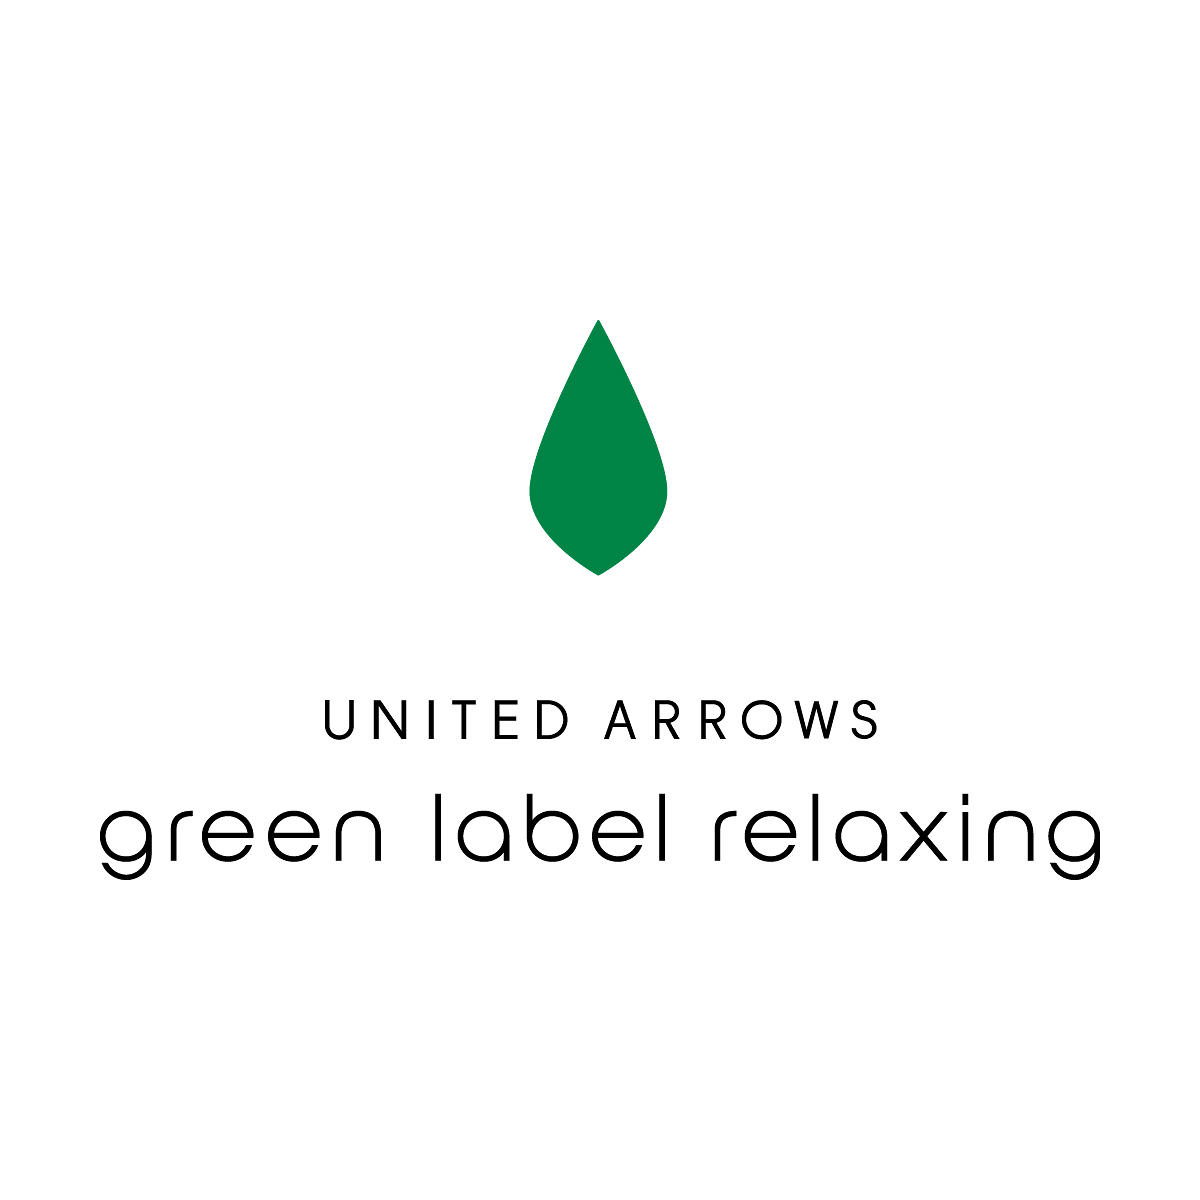 UNITED ARROWS GREEN LABEL RELAXING